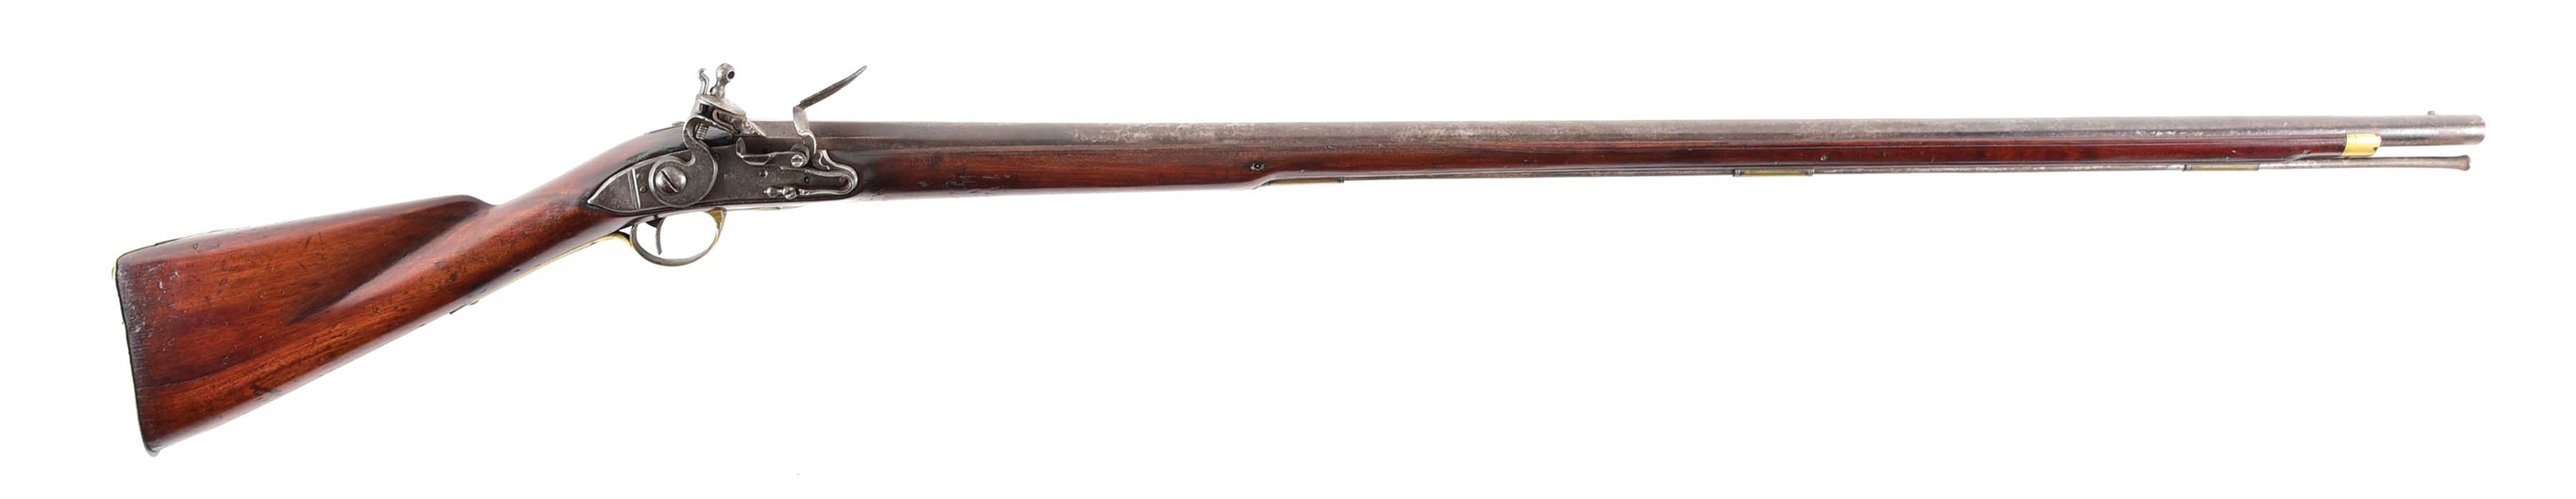 (A) RARE FLINTLOCK COMMITTEE OF SAFETY MUSKET MARKED TO THE "STATE OF CONNECTICUT."